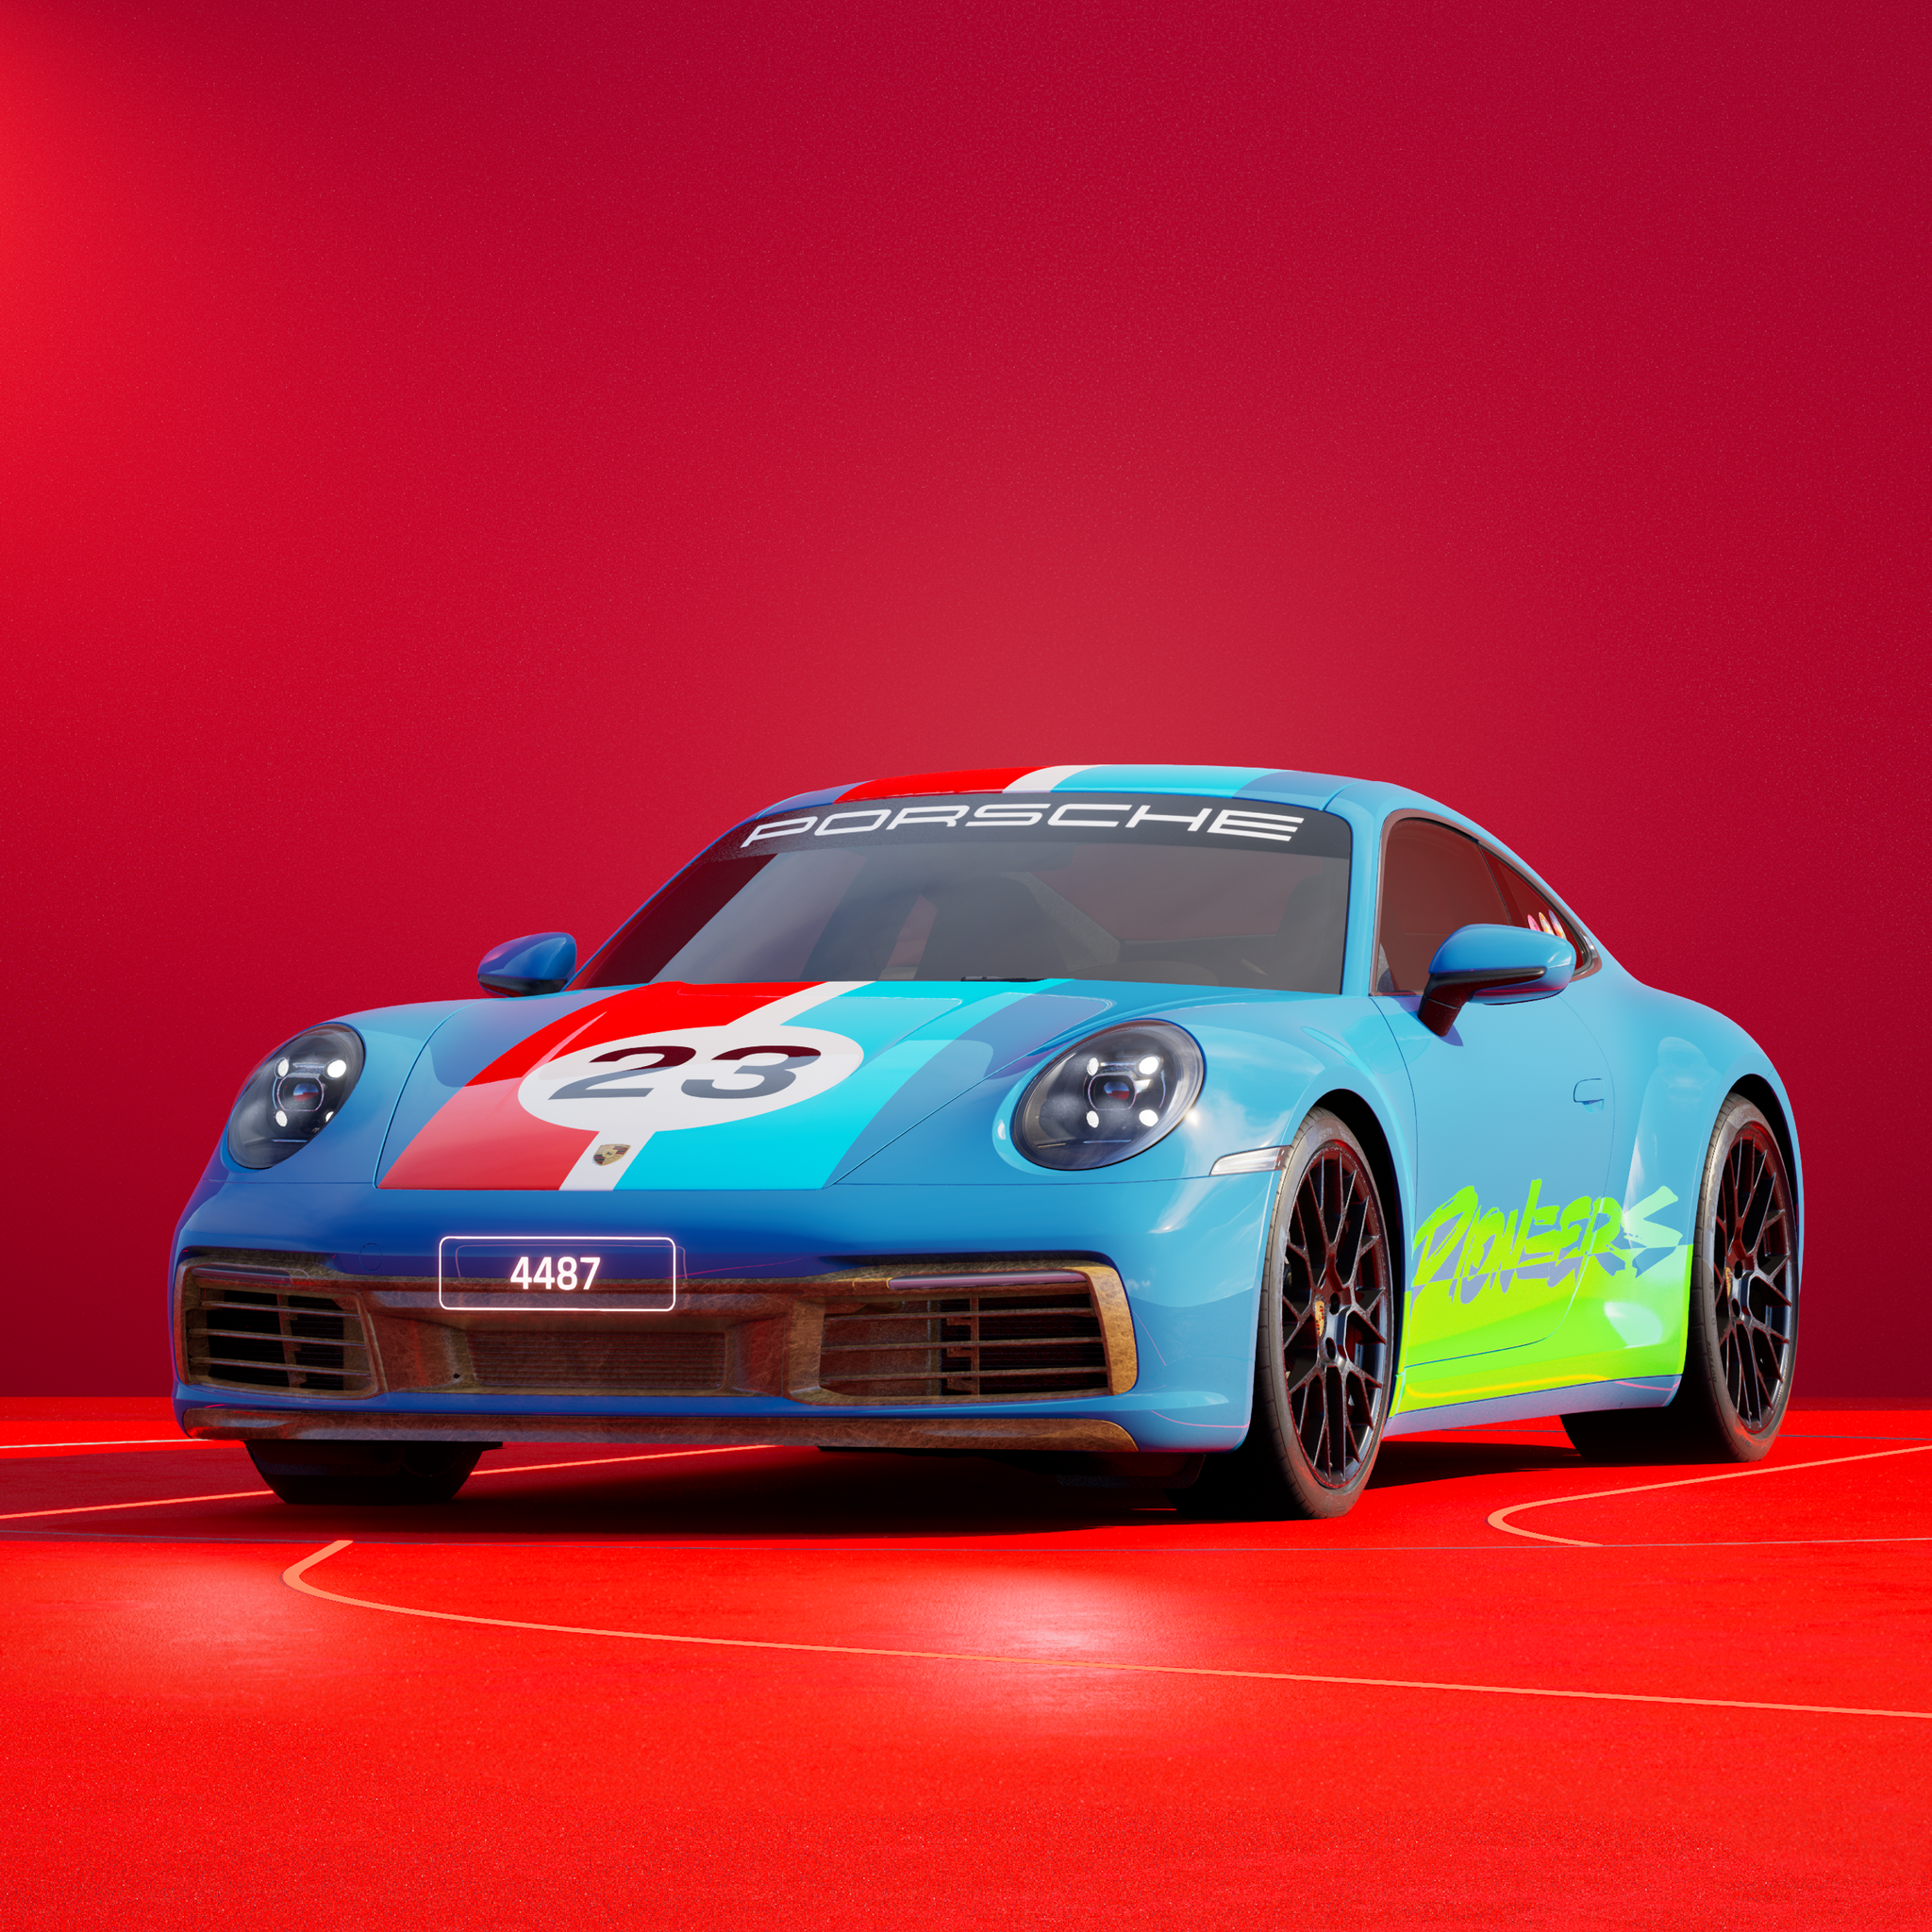 The PORSCHΞ 911 4487 image in phase